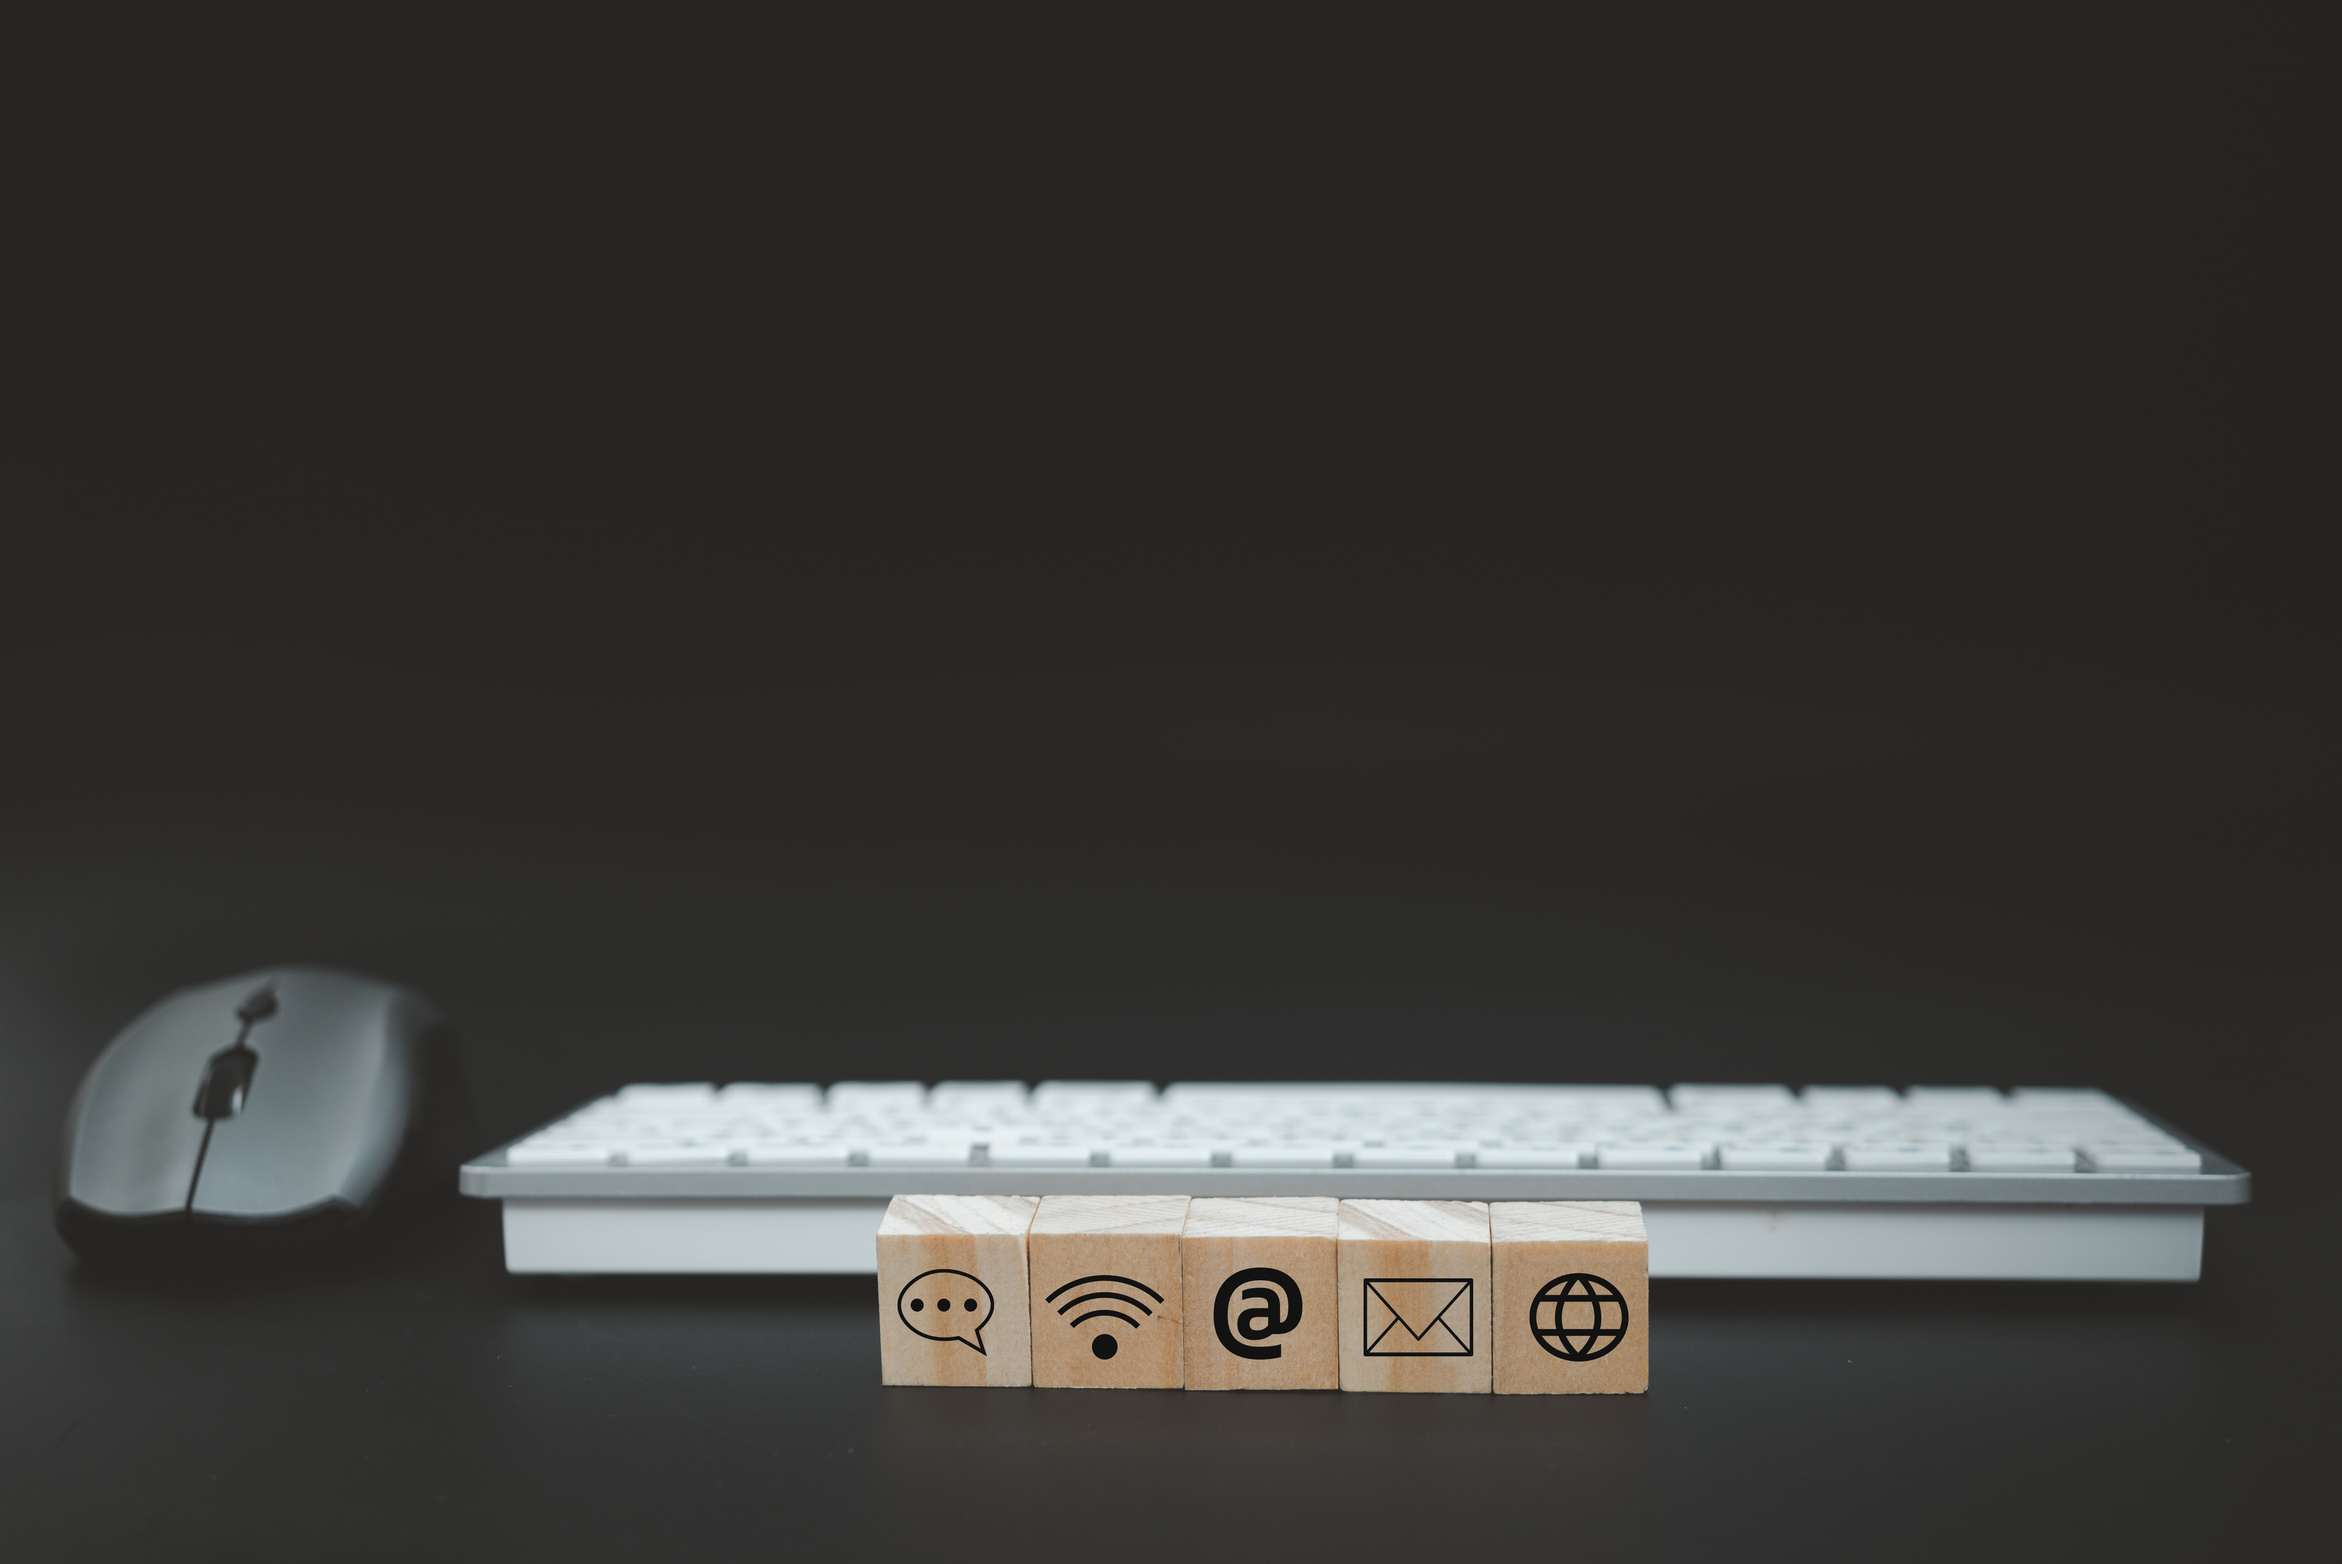 Online business communication symbols contact us or e-mail address marketing concept on wooden cubes with computer keyboard background.